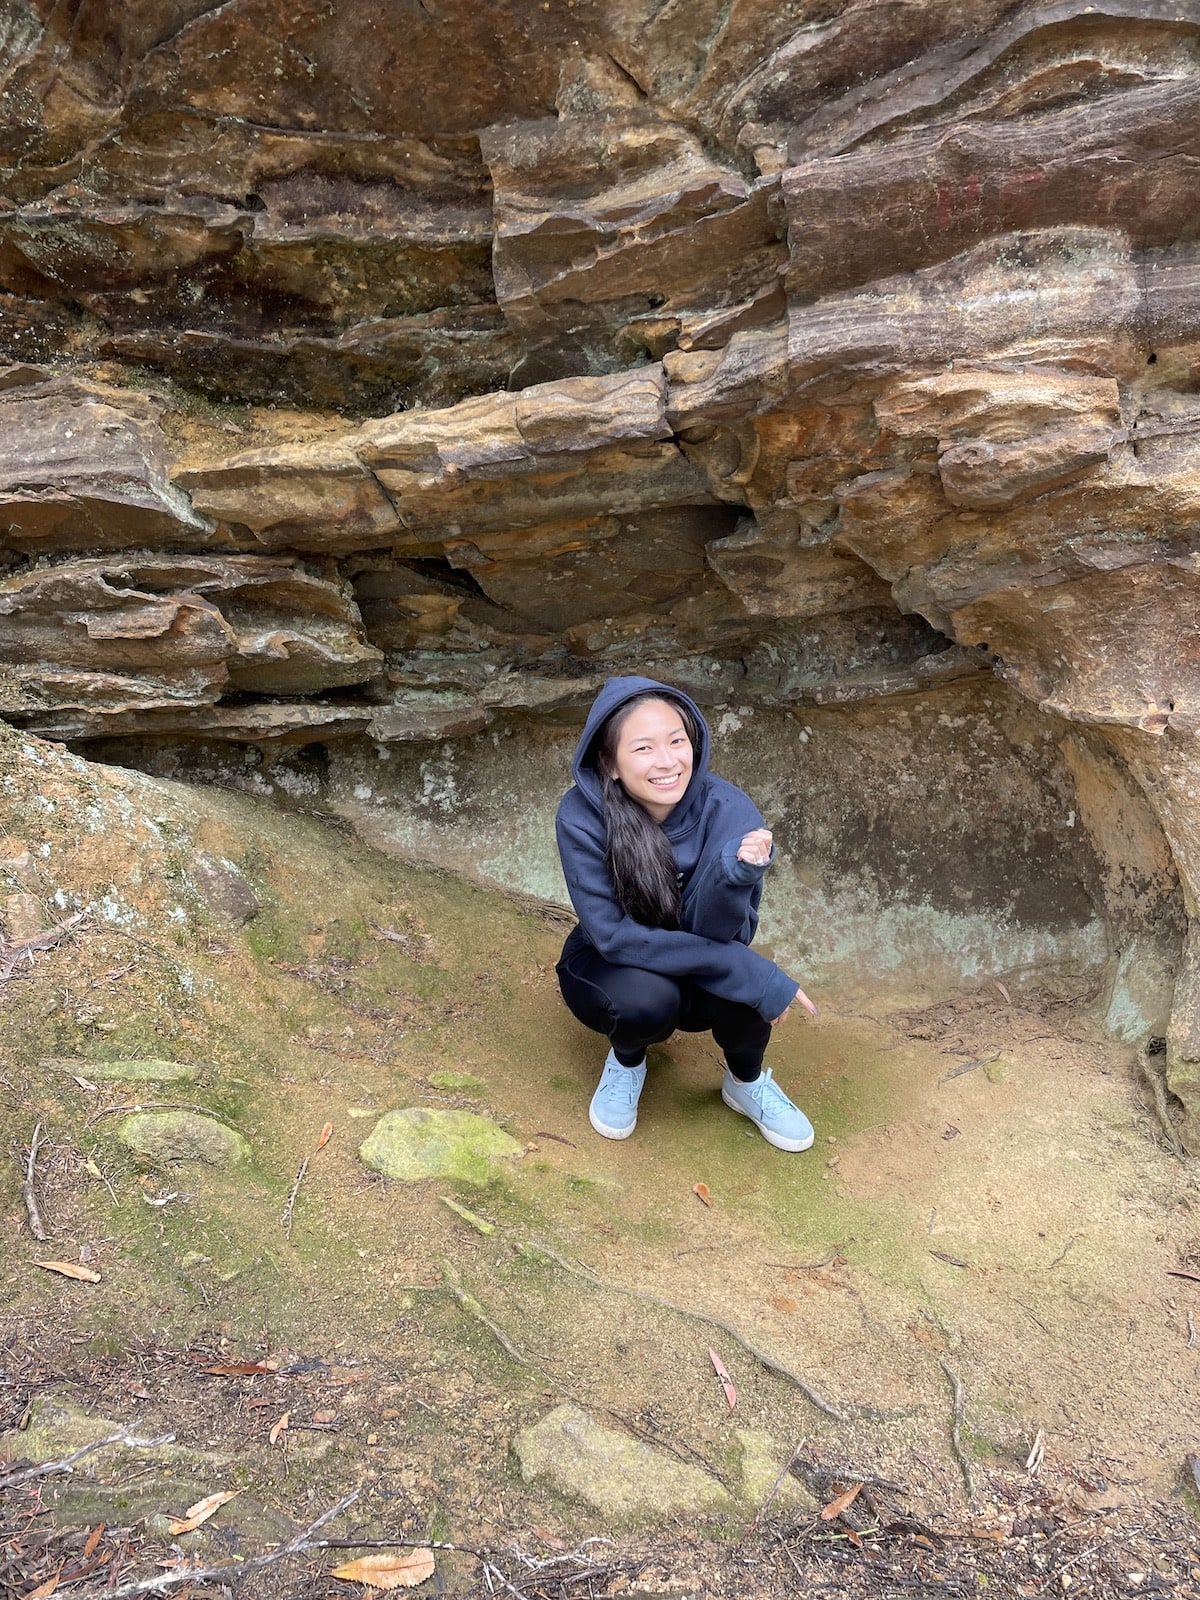 Me, Georgie, wearing a dark hoodie and pants, crouching down in a nook of a light brown coloured rock cave